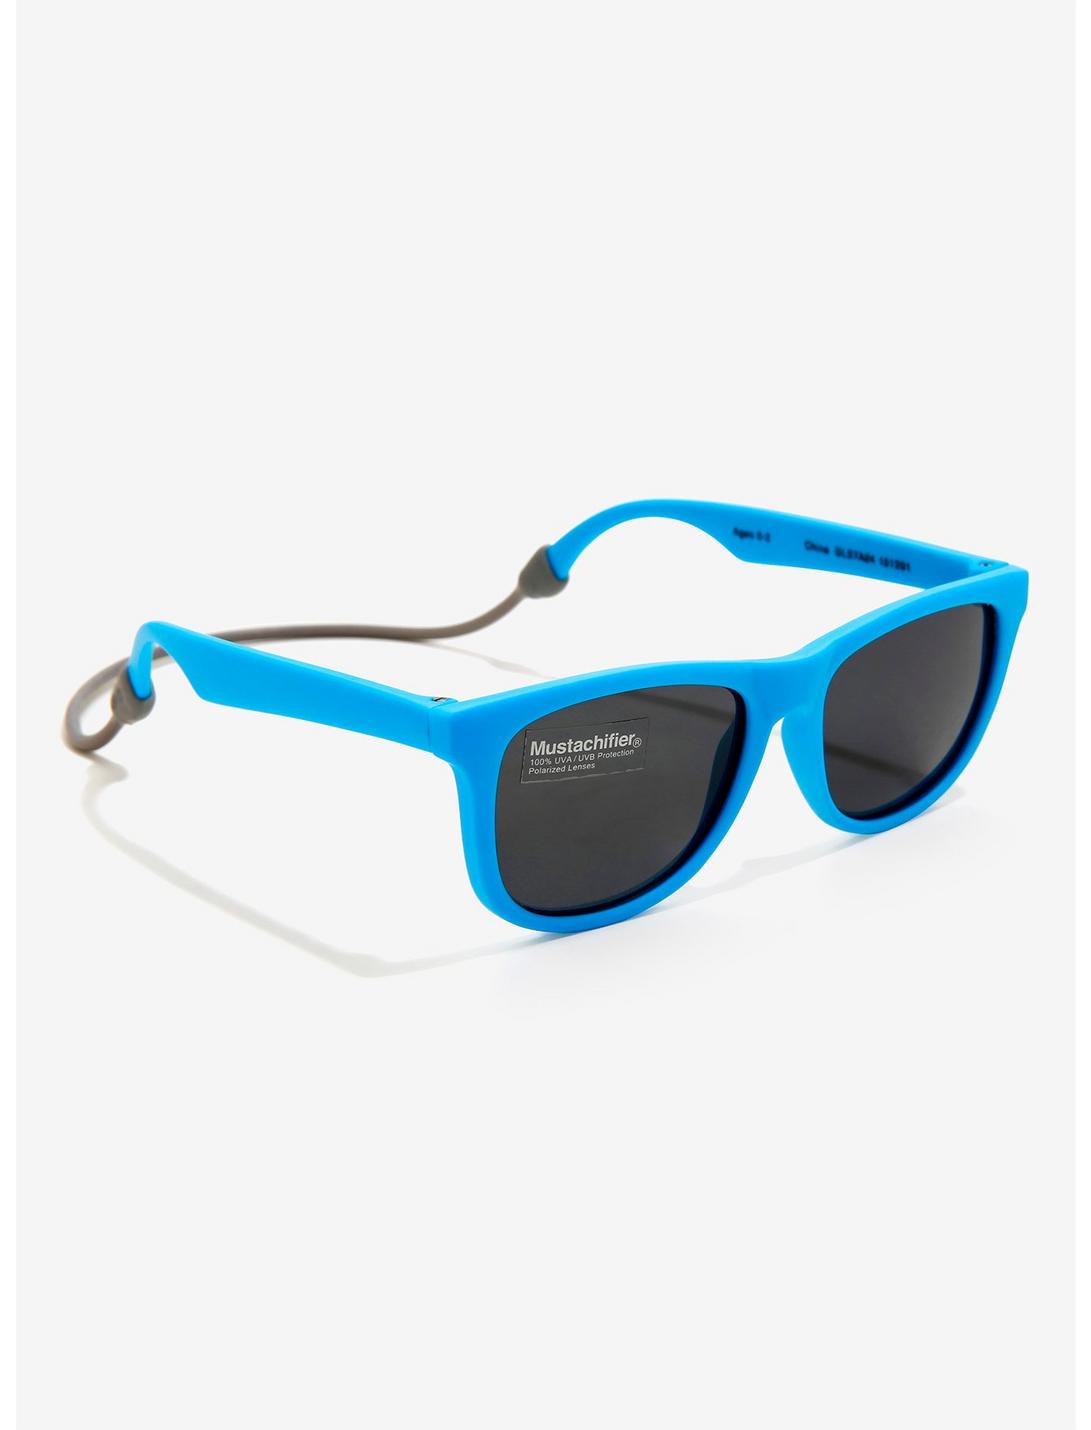 Mustachifier Baby Sunglasses In Blue, , hi-res